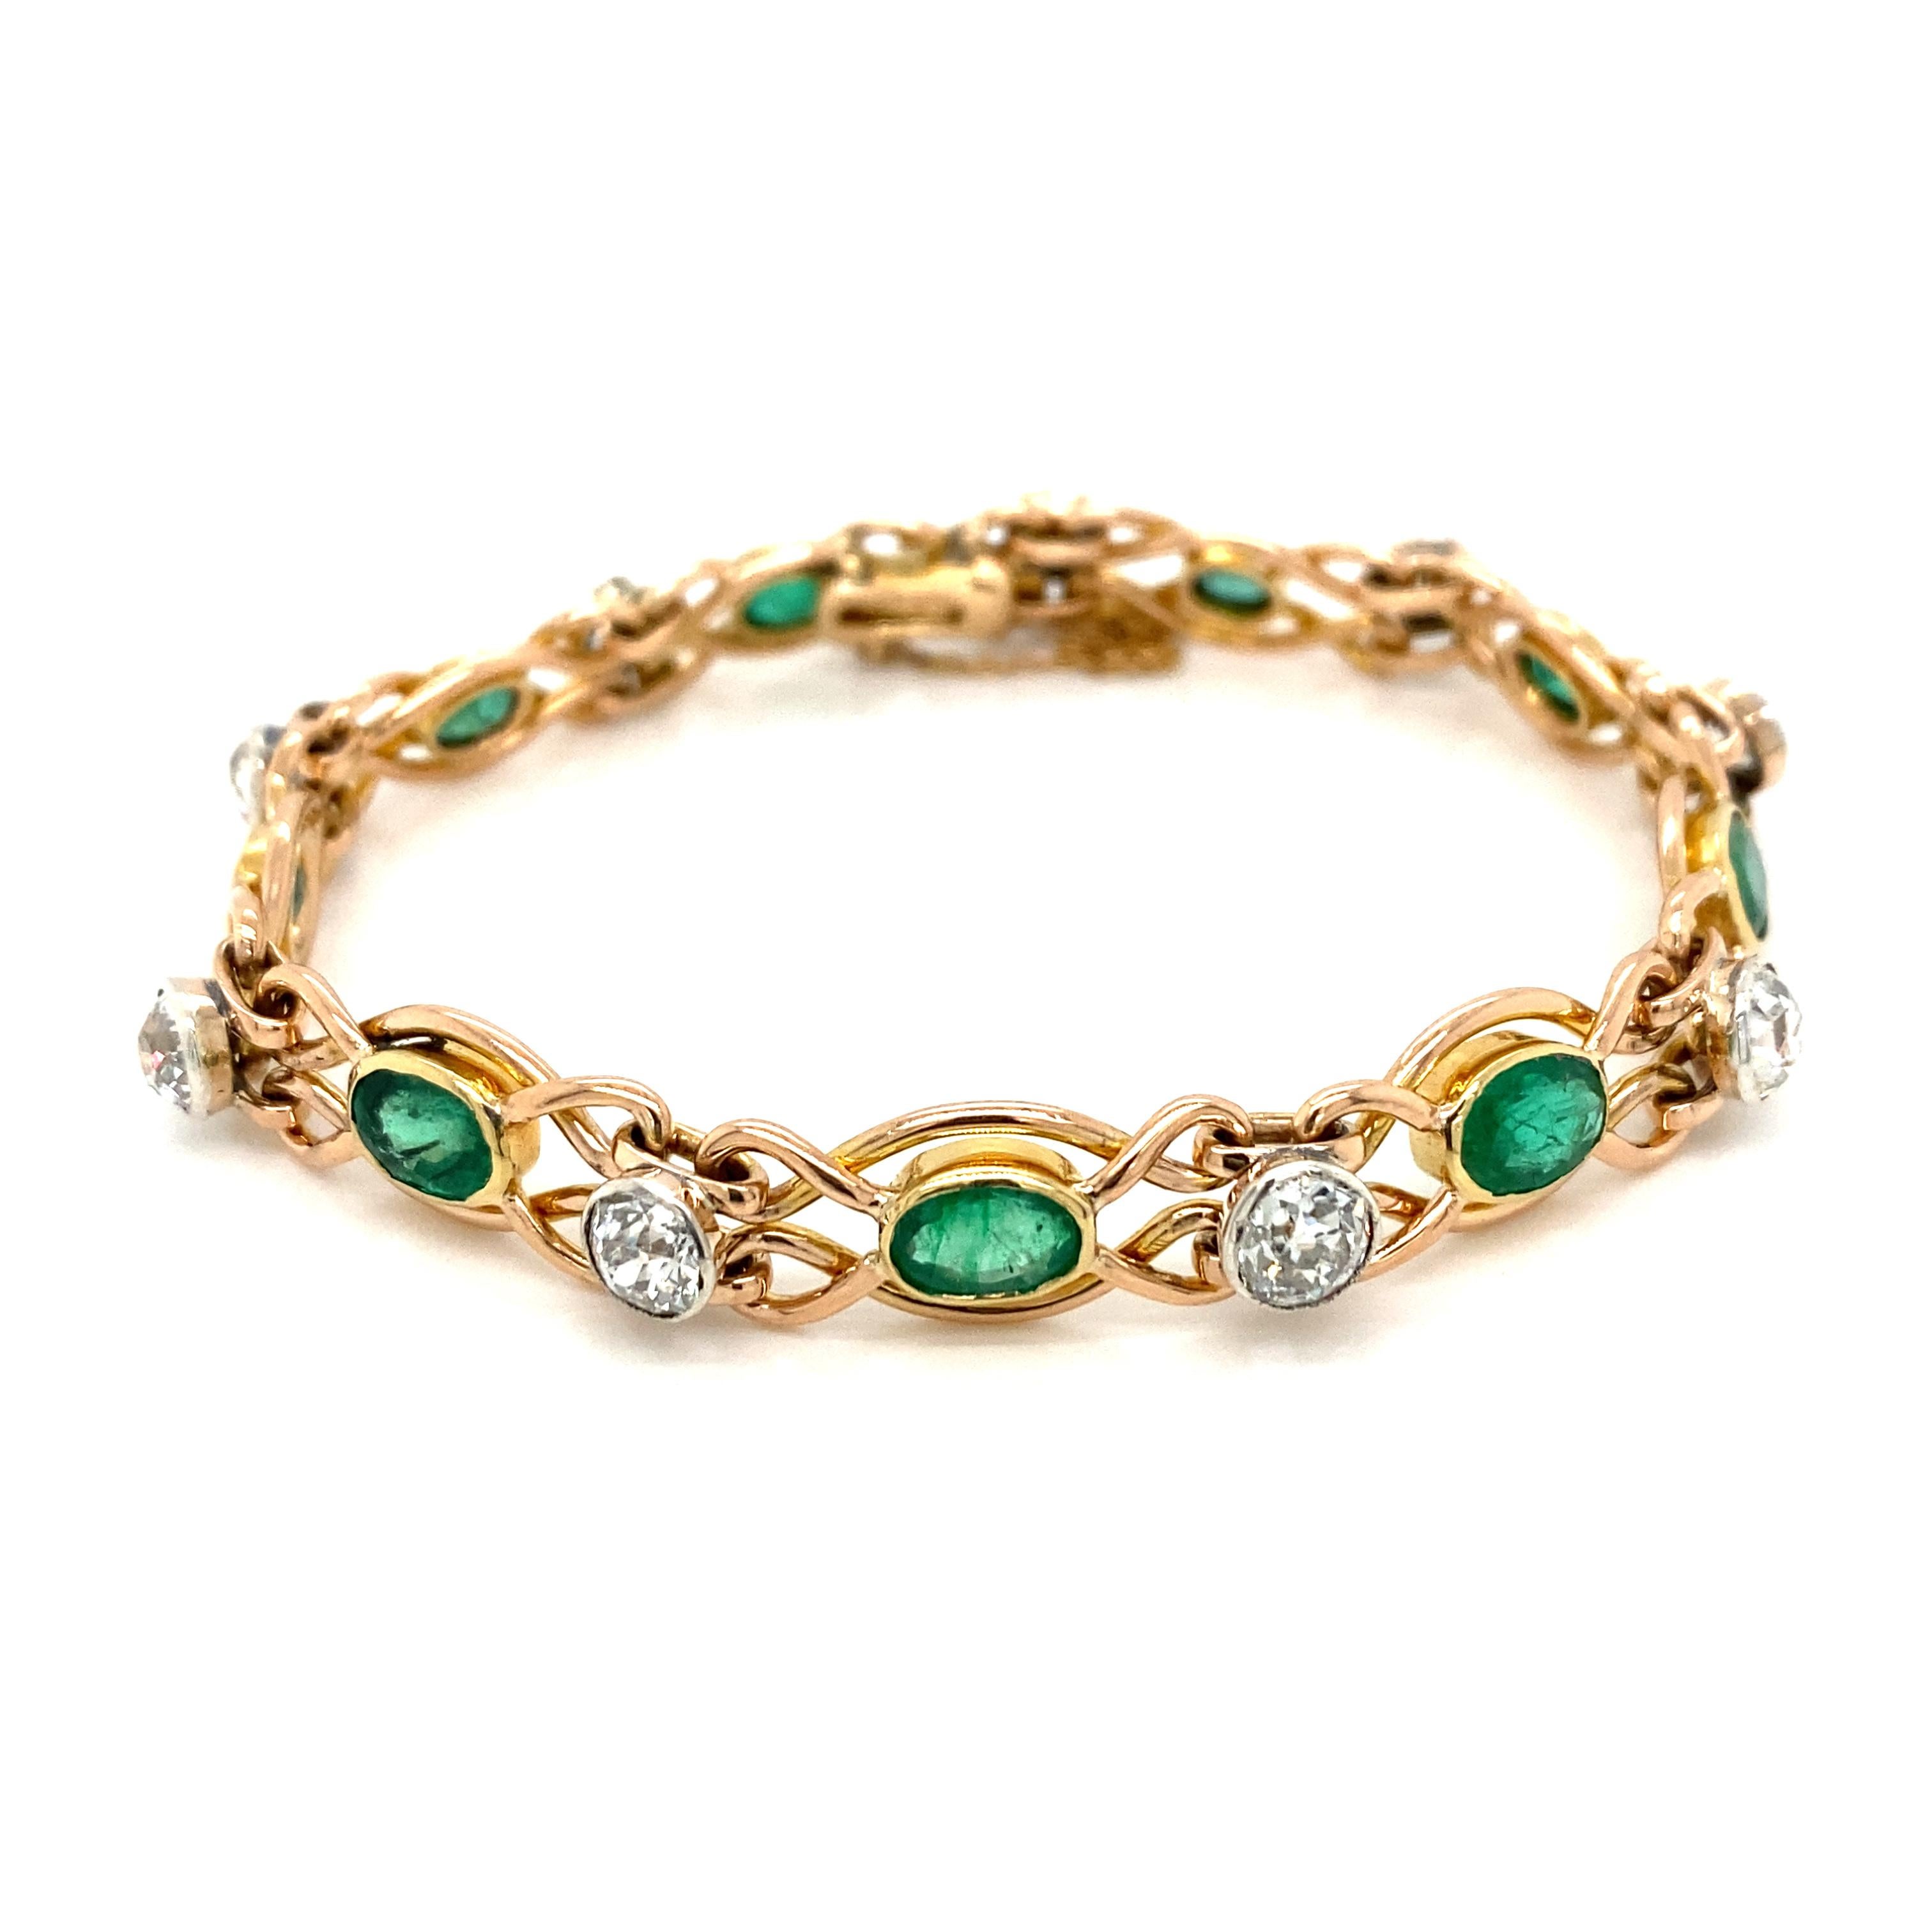 1950s 12k yellow Gold Italian retro link bracelet, set with nine excellent quality Colombian natural Emeralds, oval shape weighing 5,00 carats all together, alternated with nine sparkling Old European Cut Diamonds weighing 4 ct. graded I color, Vs